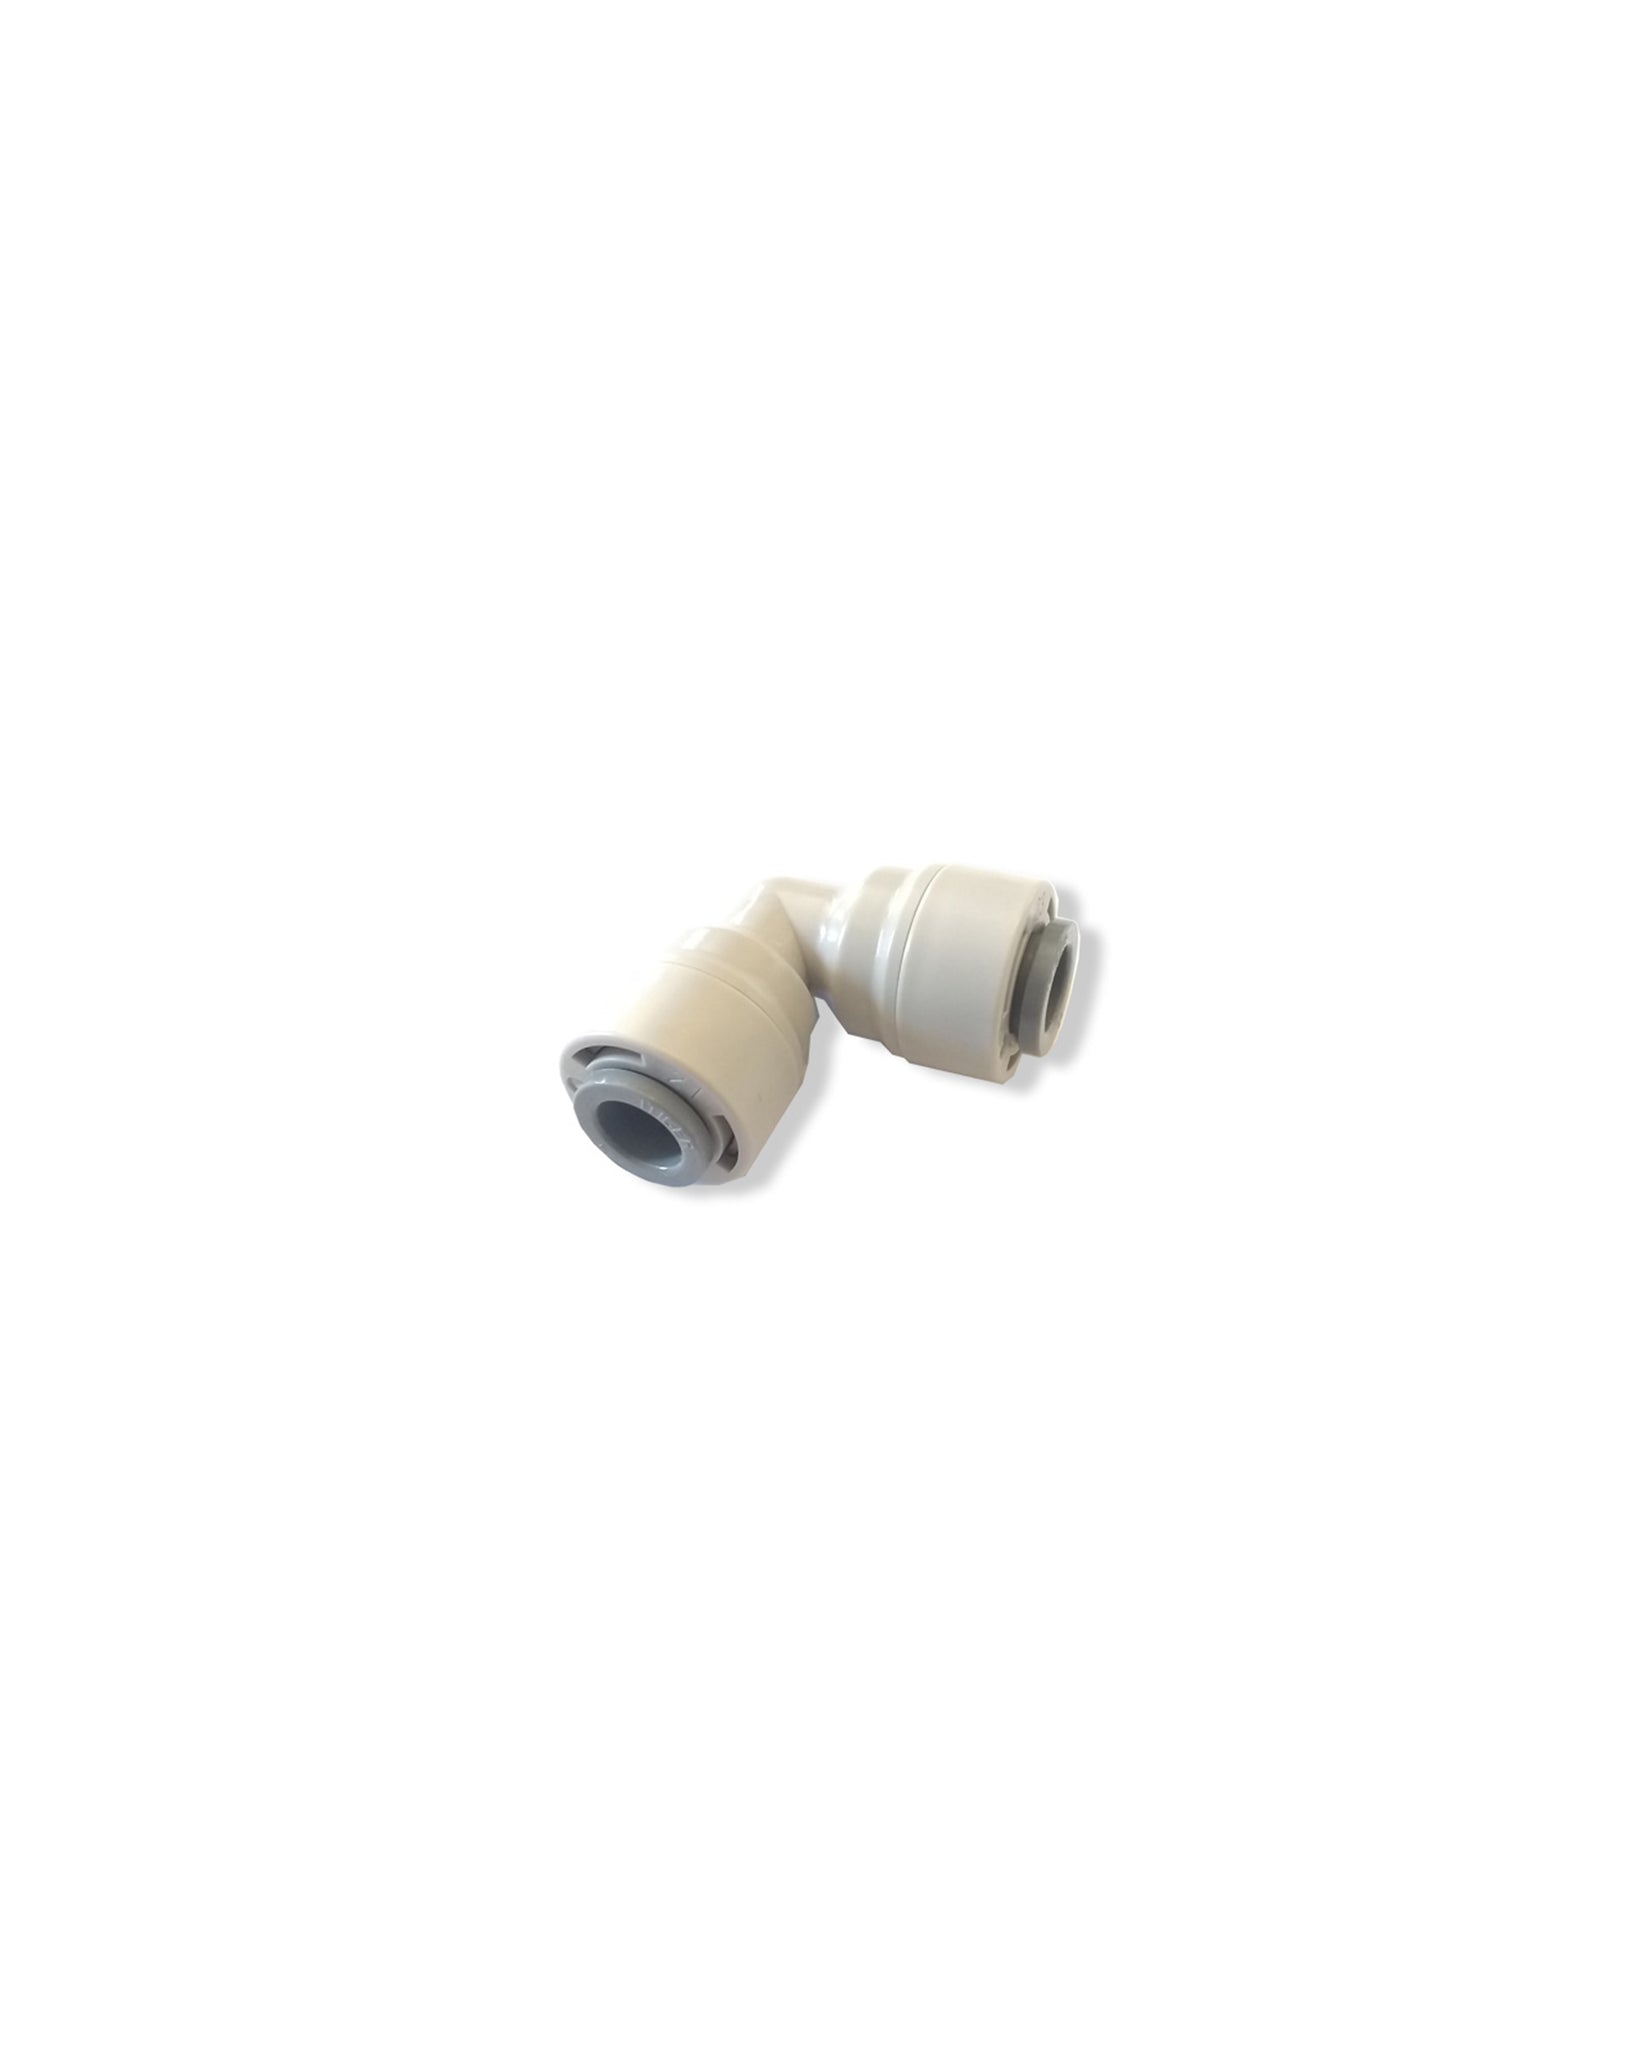 misting elbow part for portable misting system